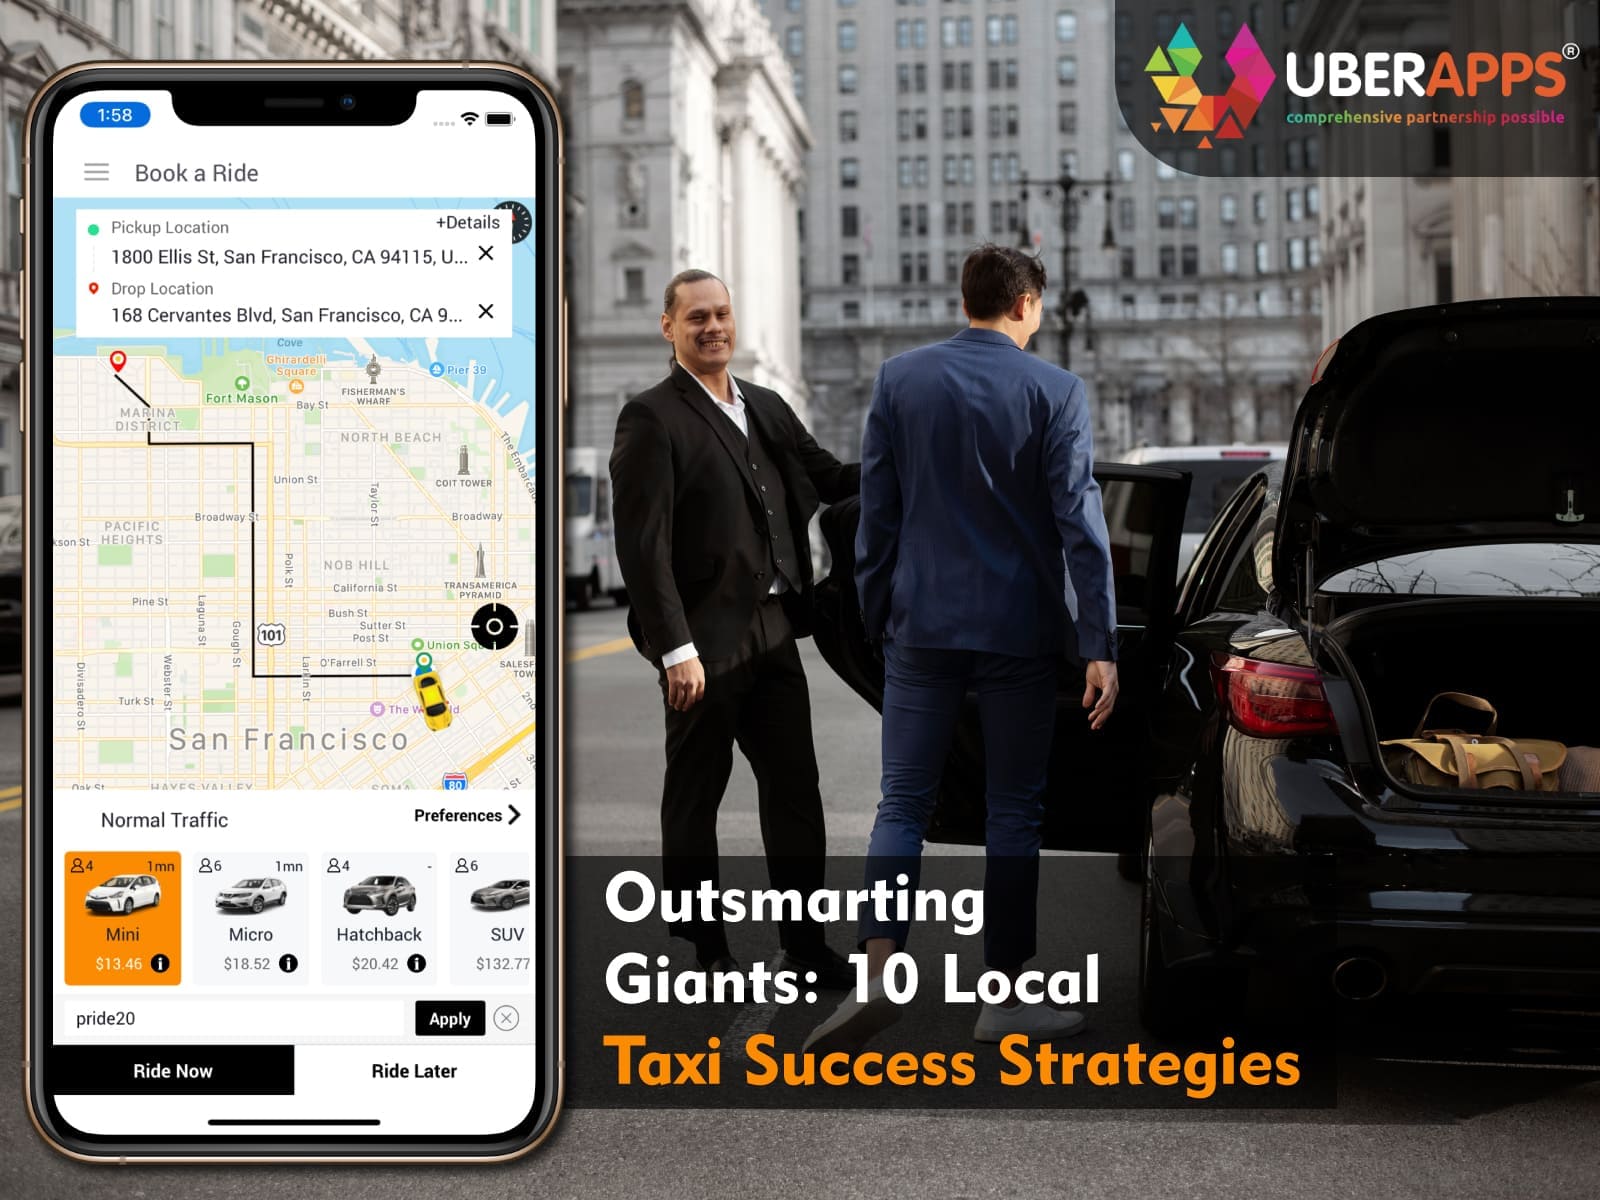 Outsmarting Giants: 10 Local Taxi Success Strategies